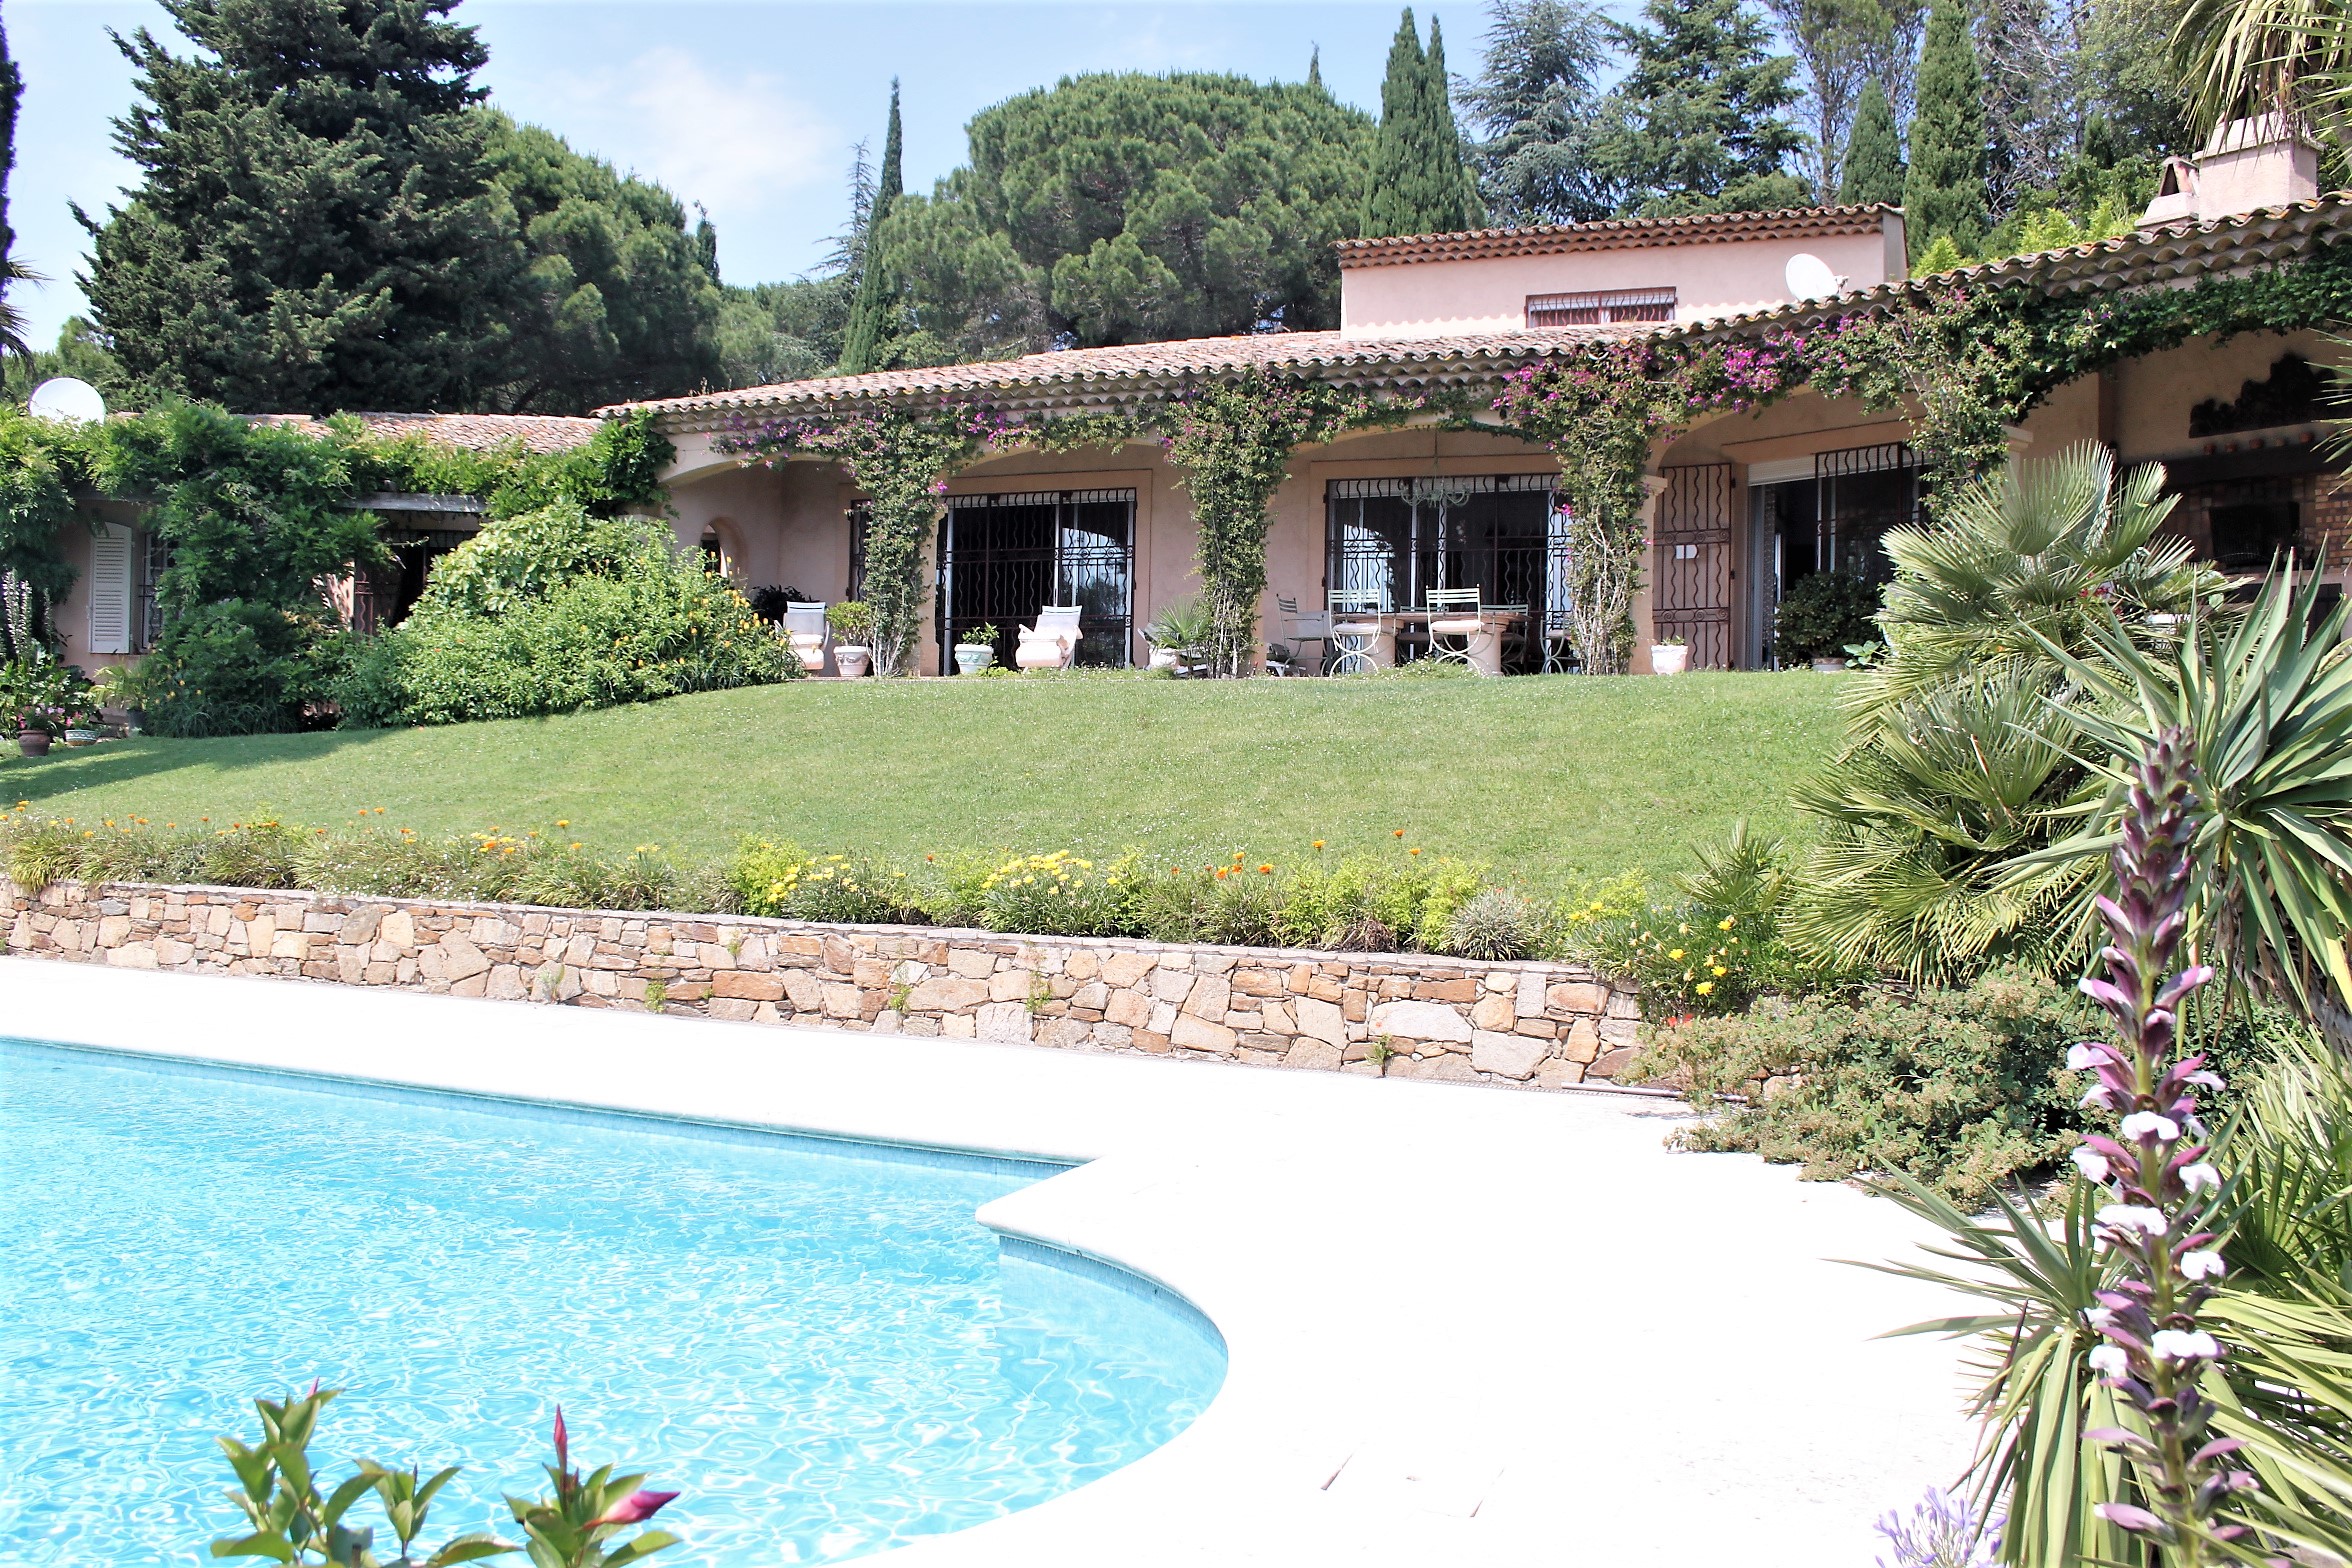 Private residential domain, ten minutes from Saint-Tropez